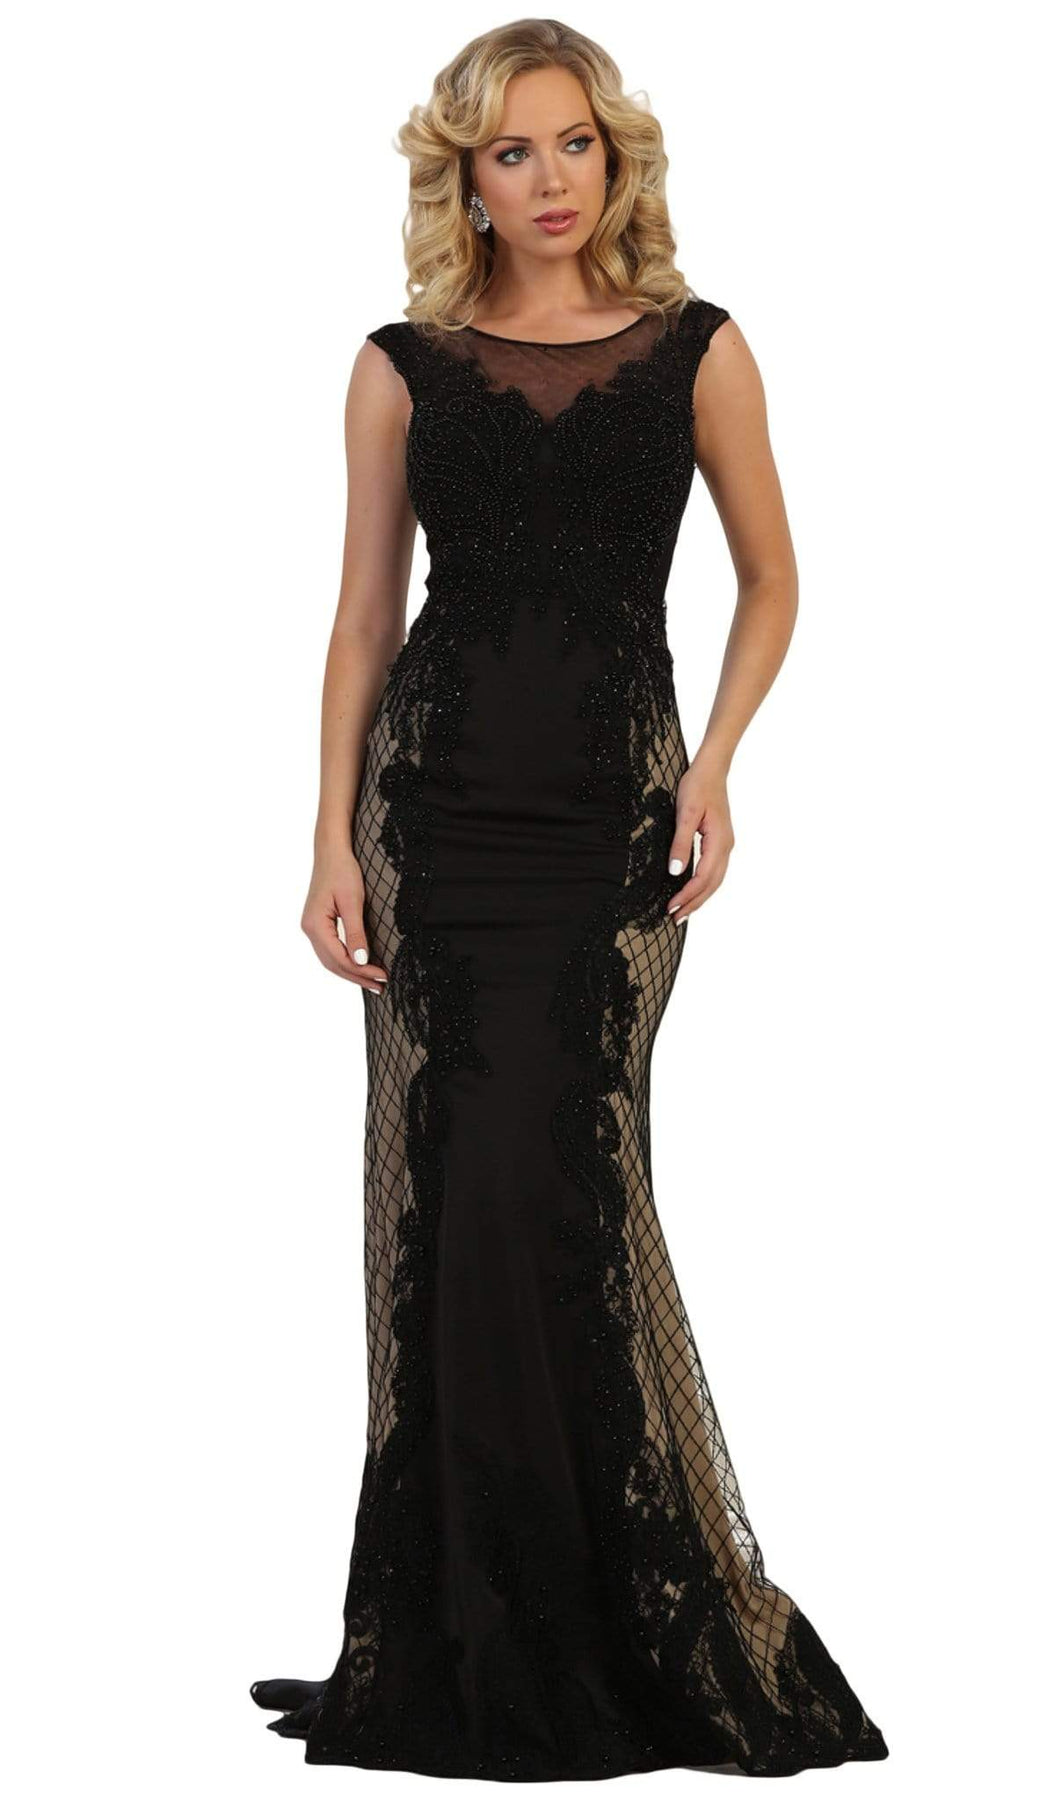 May Queen - RQ7626 Embroidered Illusion Bateau Dress Special Occasion Dress 4 / Black/Nude